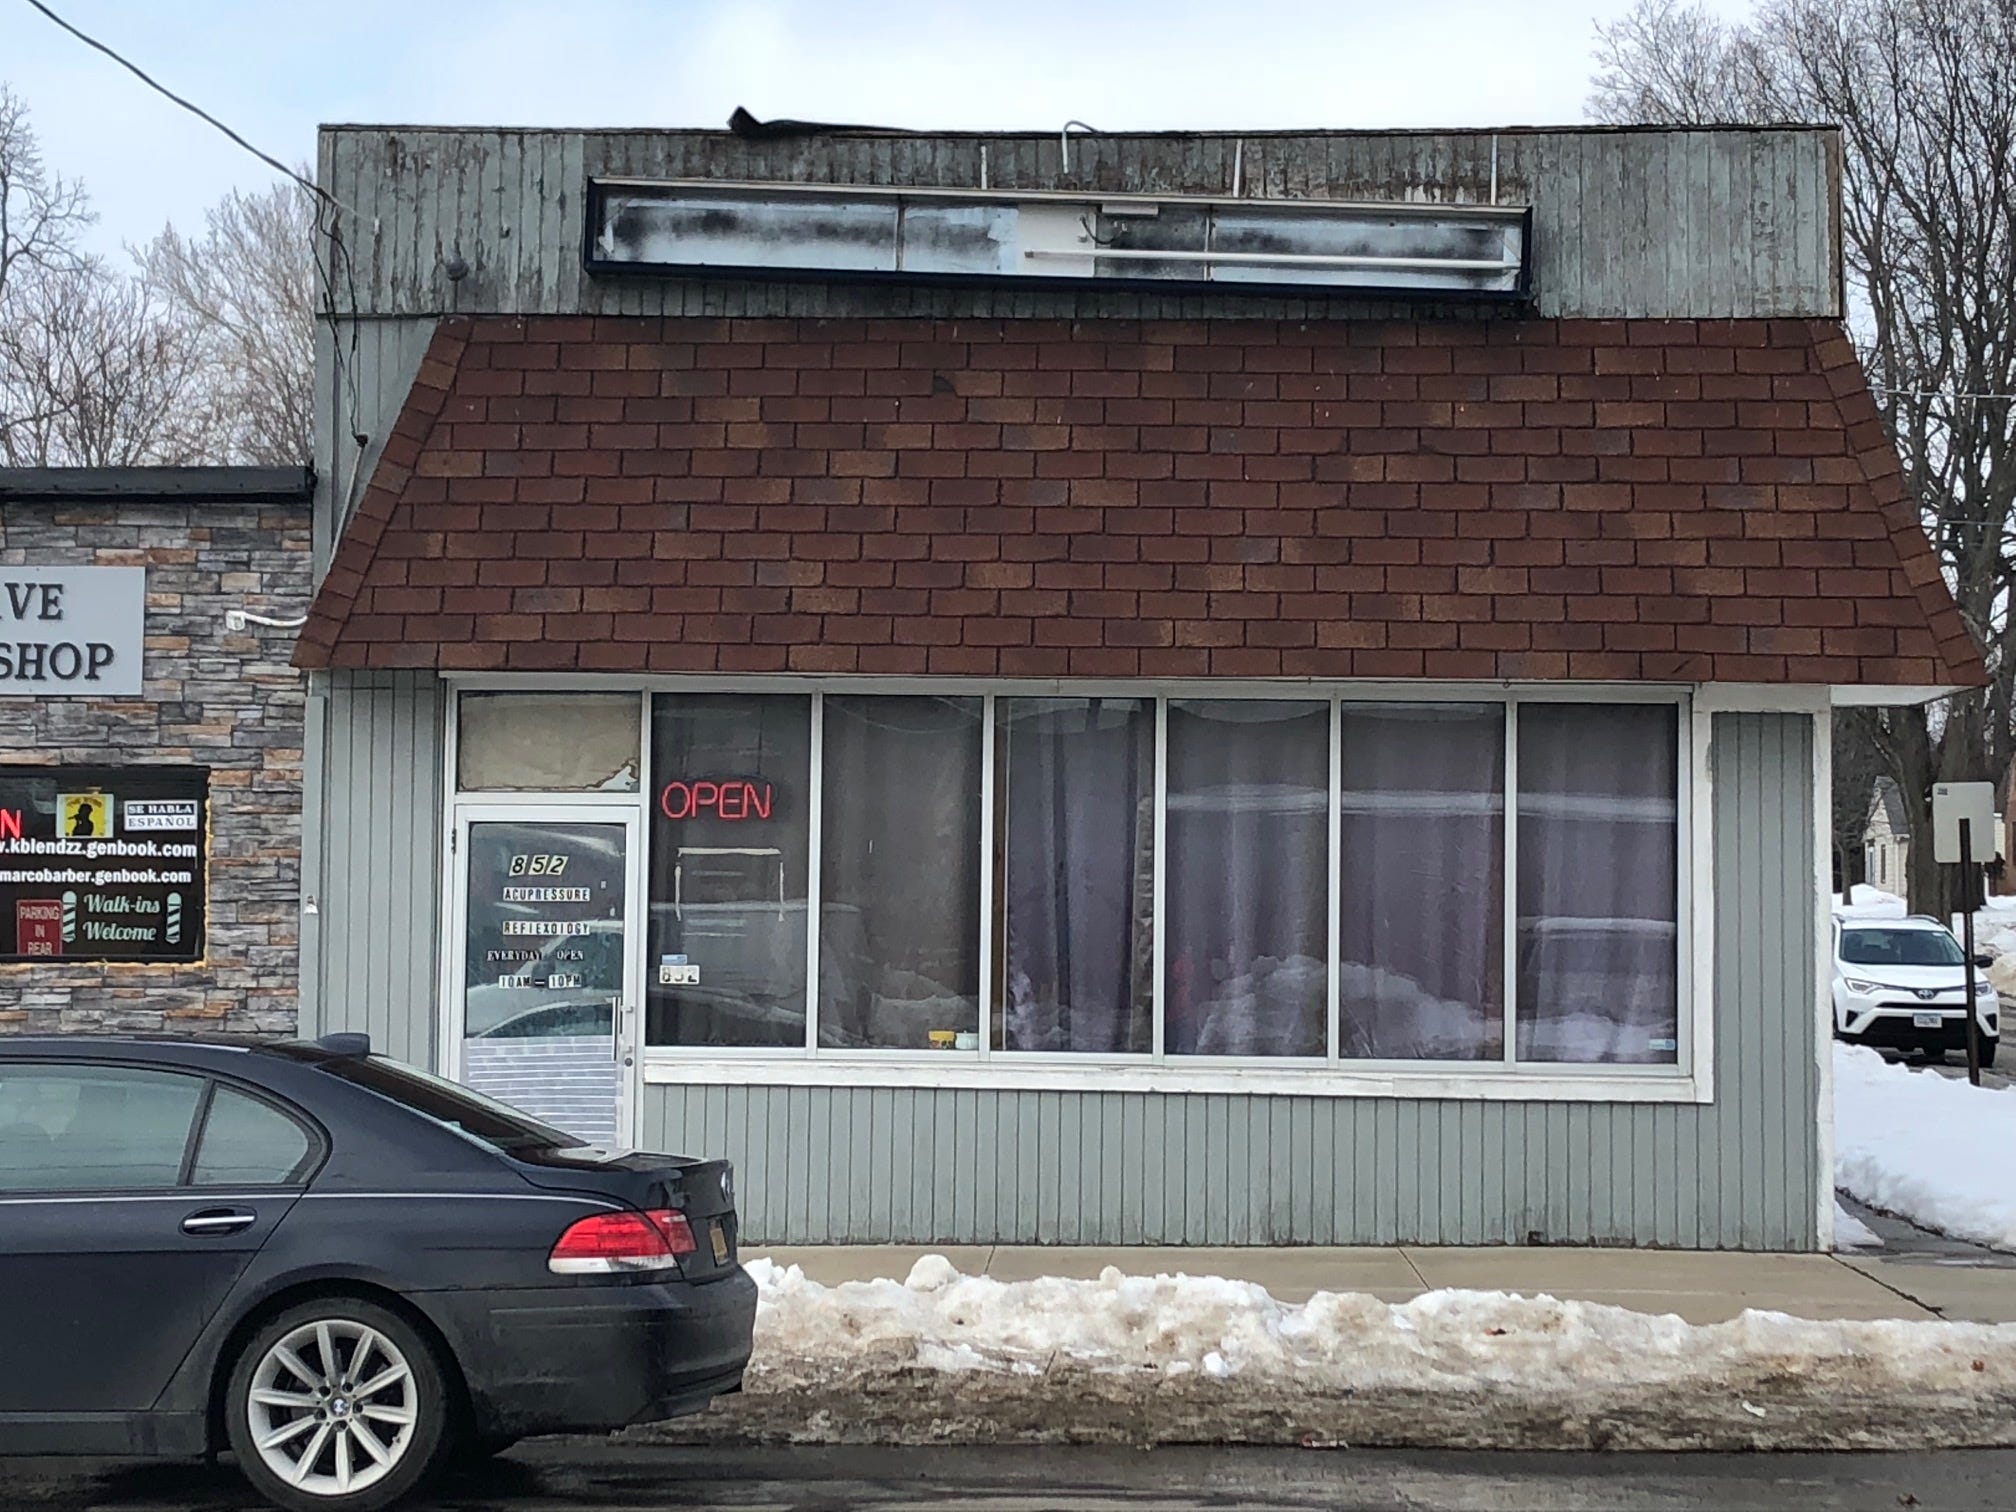 Watchdog sent customers into three Des Moines massage parlors. Here's what happened.